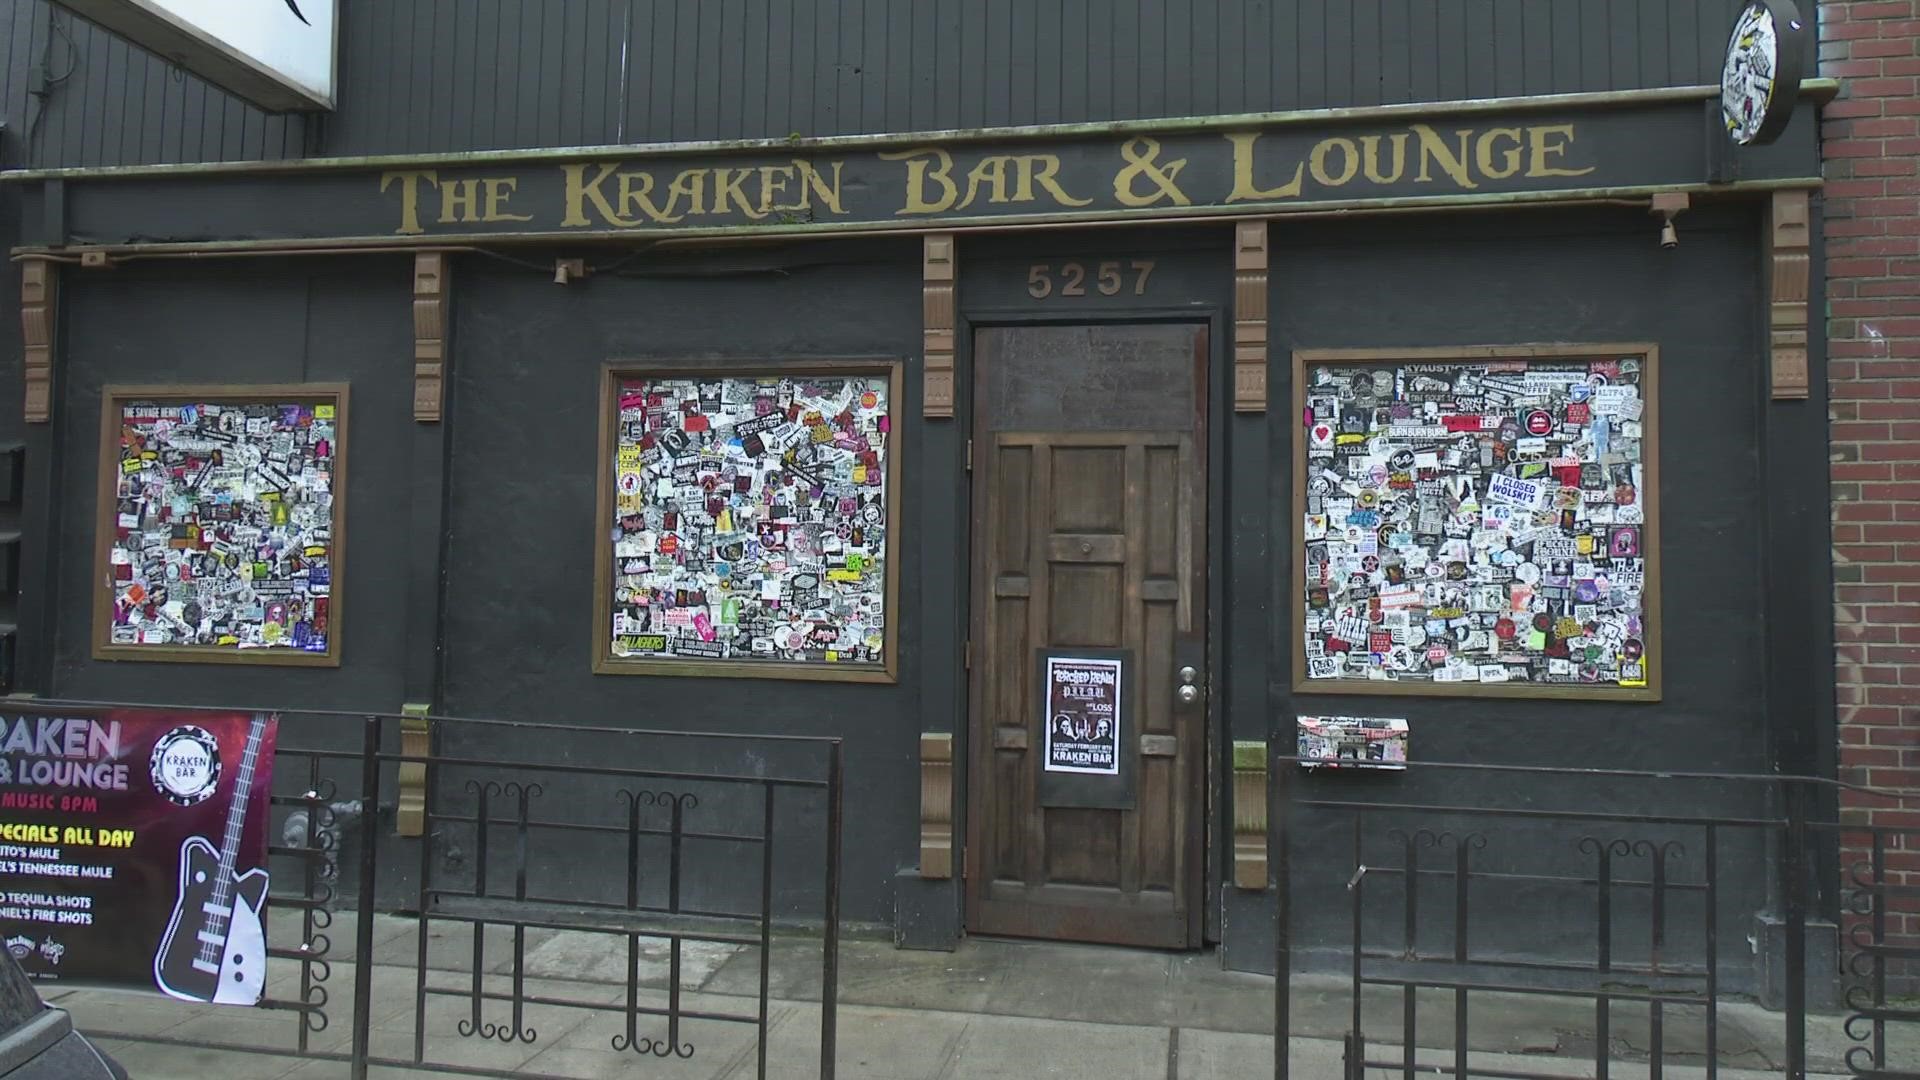 The small bar has been a treasure for punk rock music lovers and gave several bands their first opportunities to be on stage.